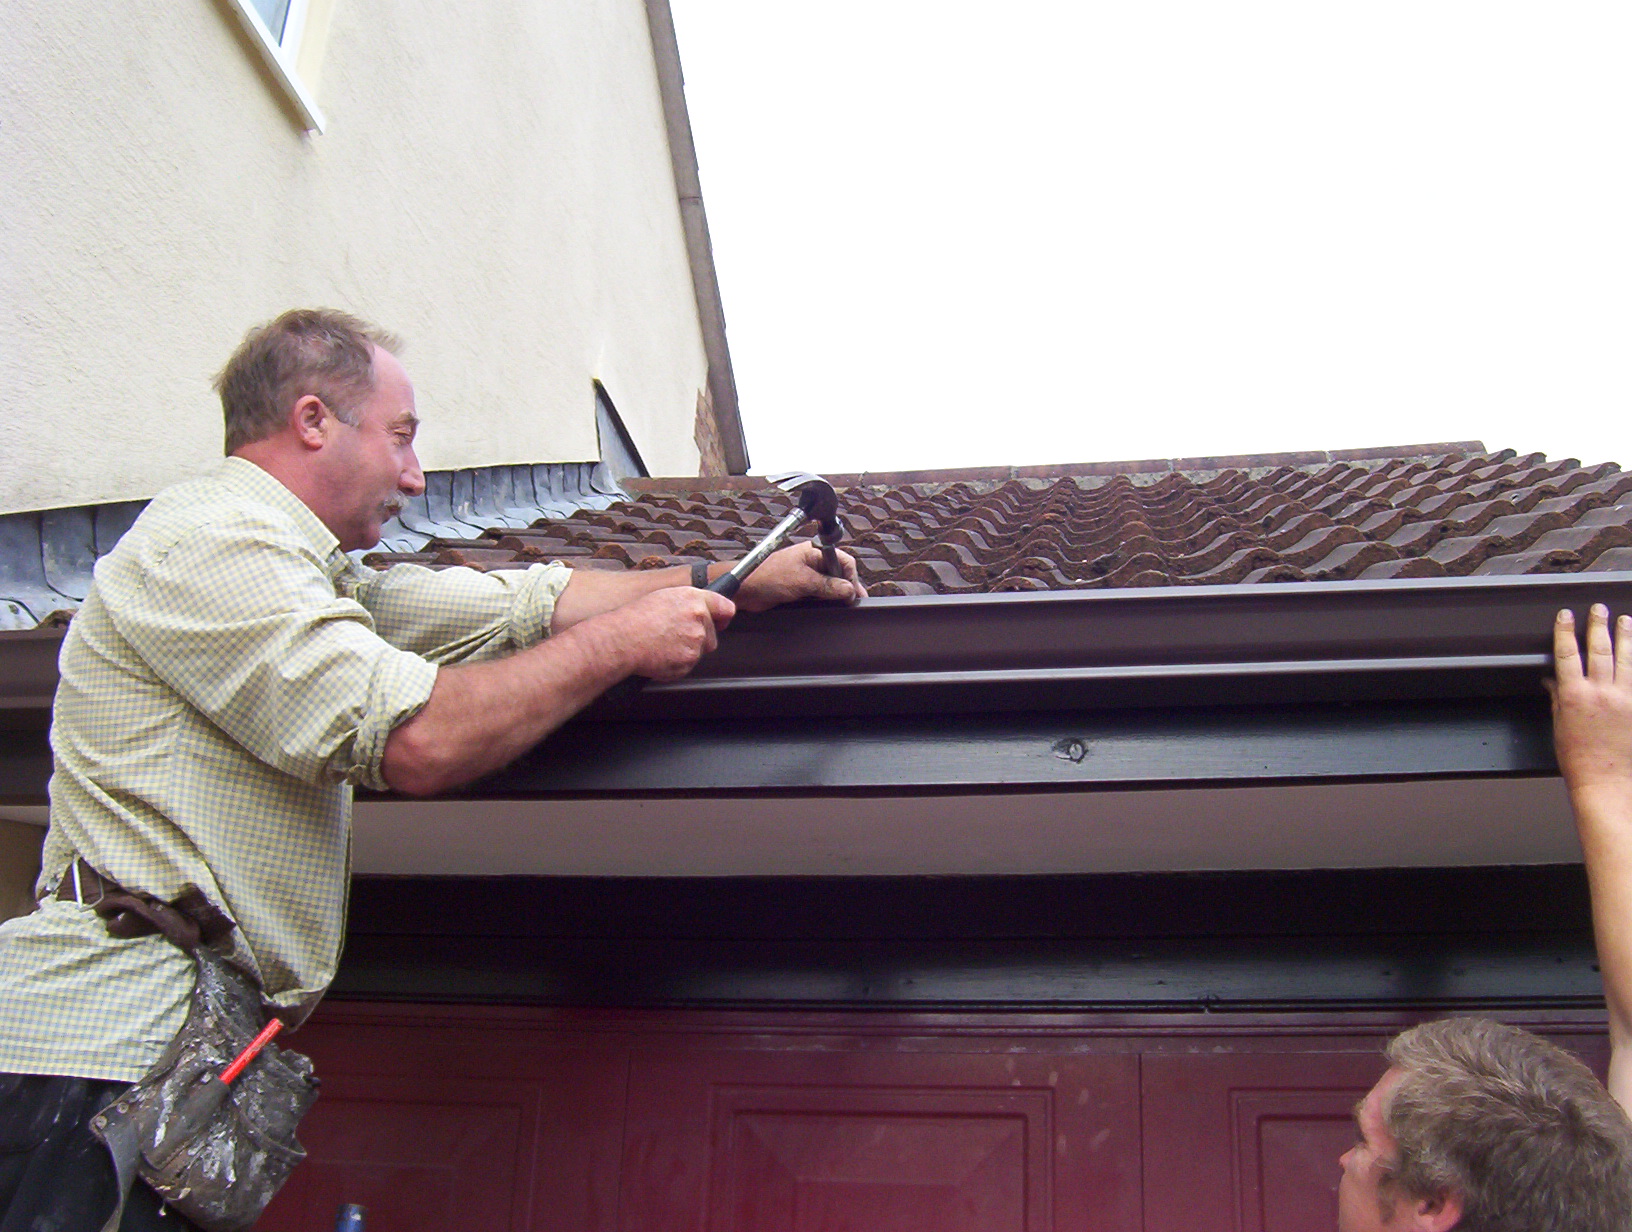 How To Choose And Purchase The Right Gutters For Your Home?